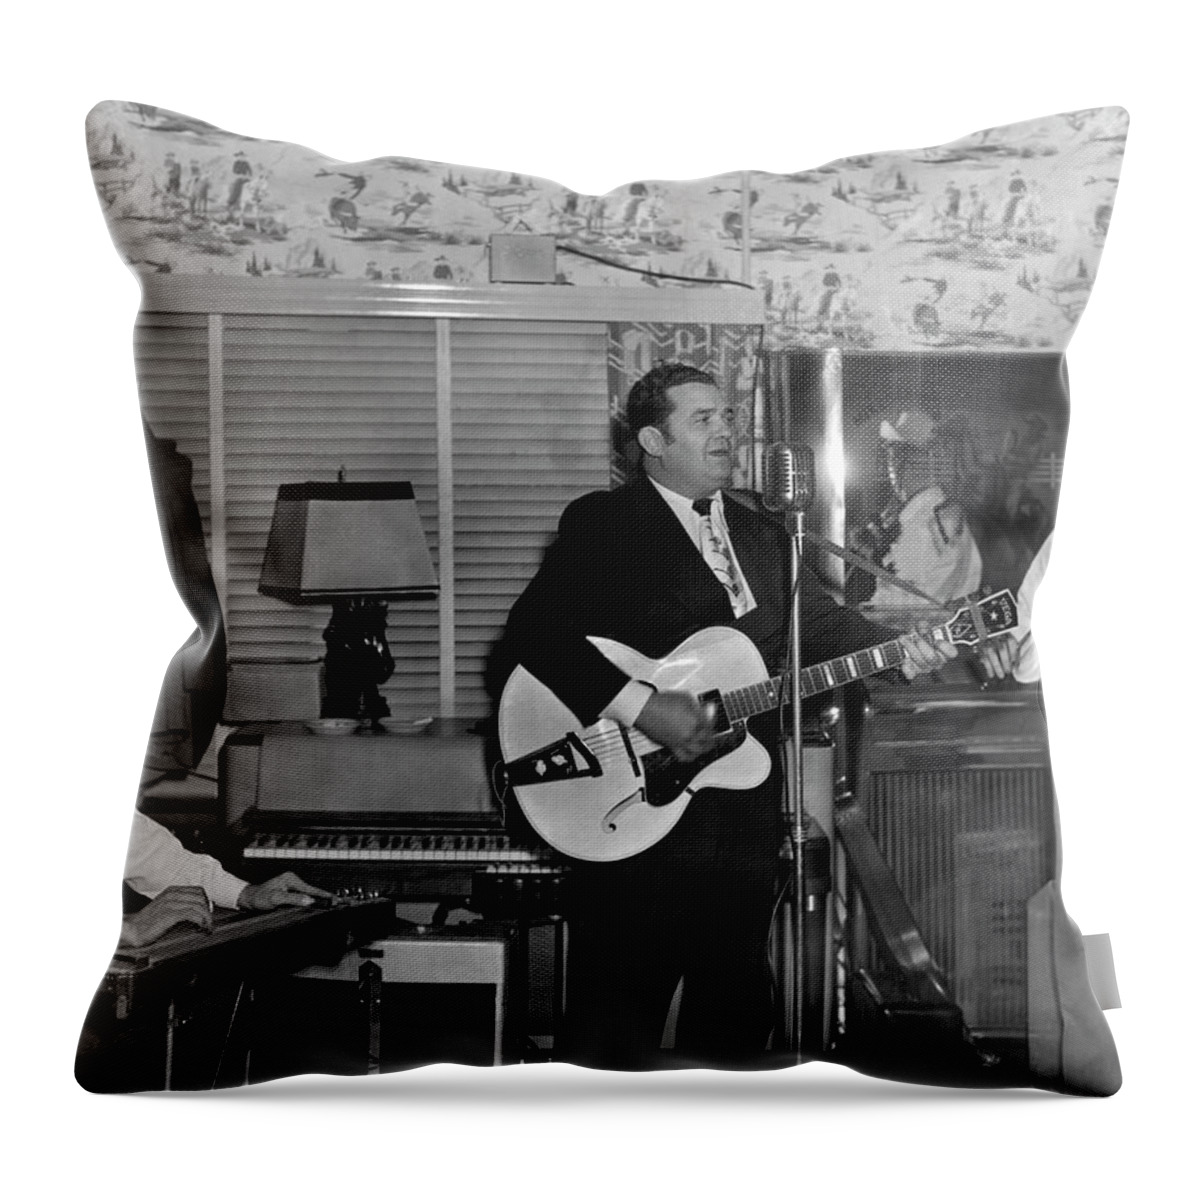 1940s Throw Pillow featuring the photograph Country Music Star Bob Wills by Underwood Archives